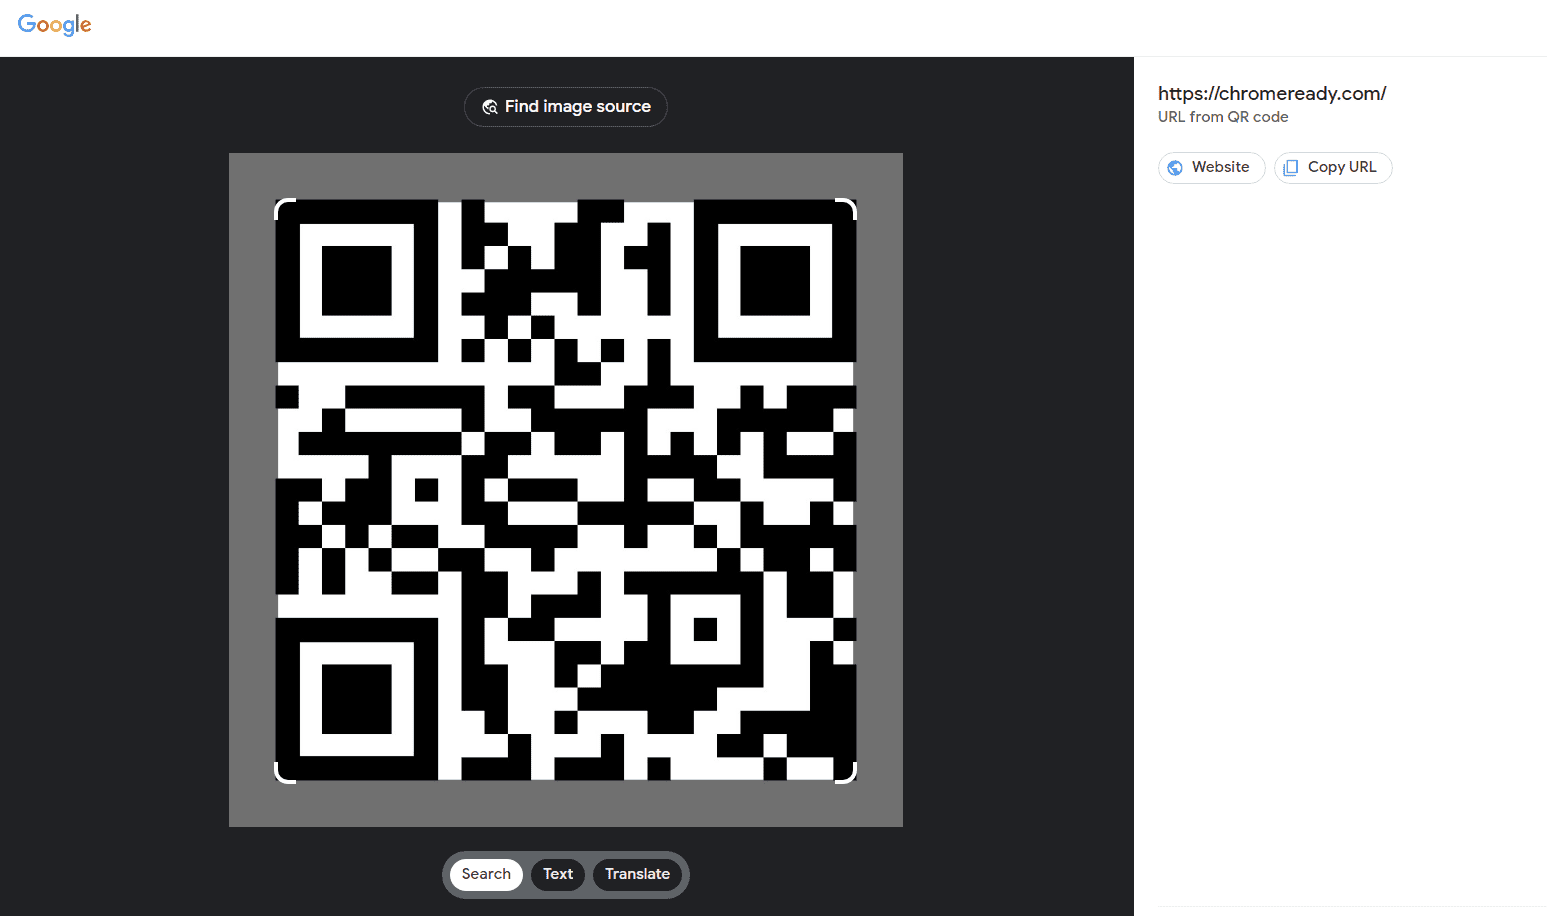 Google Lens with an accurate scan of the QR code